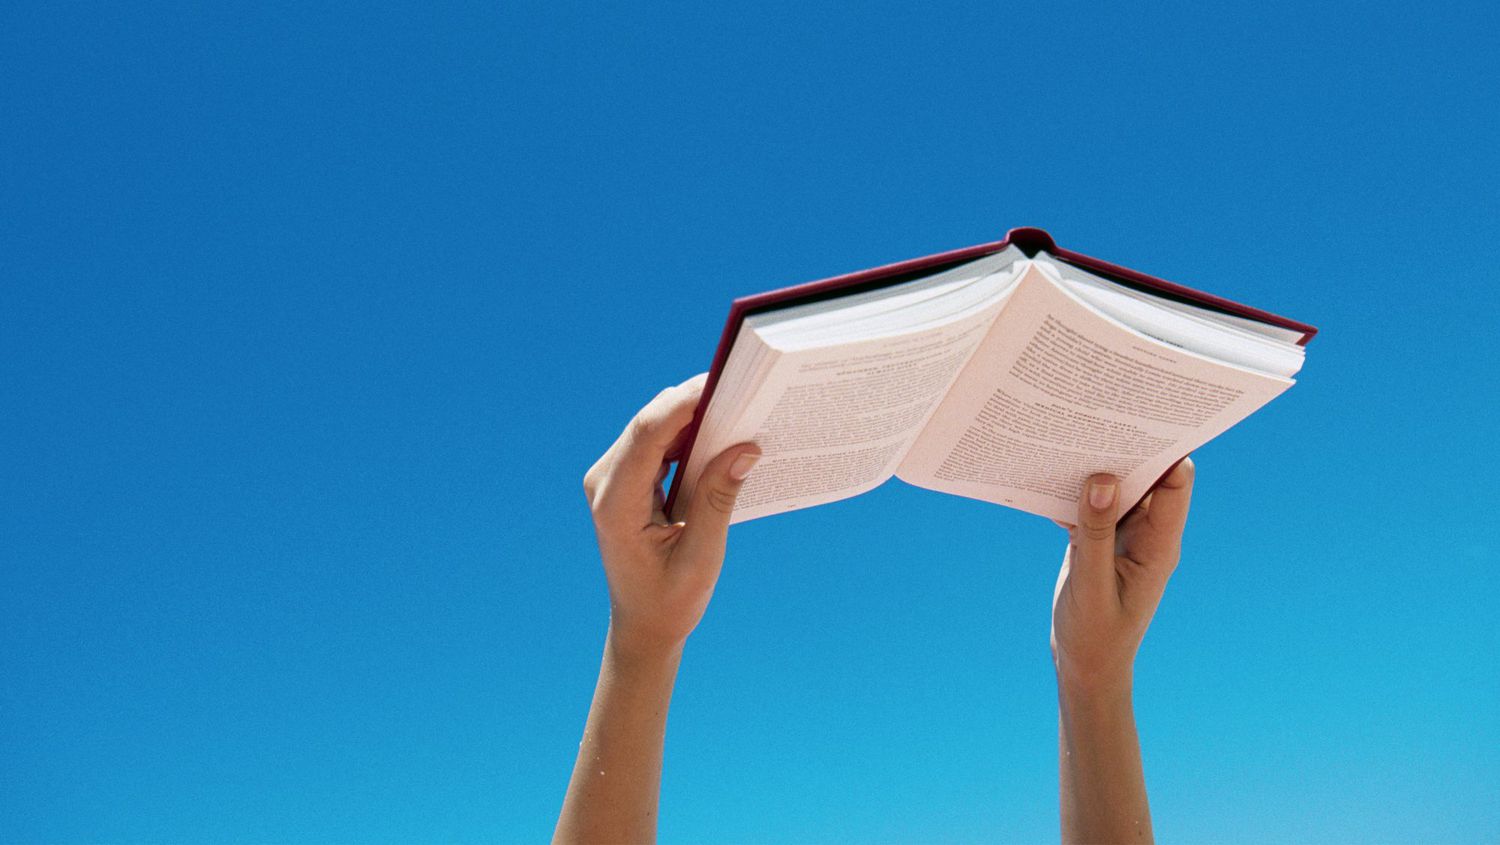 Close up of person's hands holding books against a blue sky